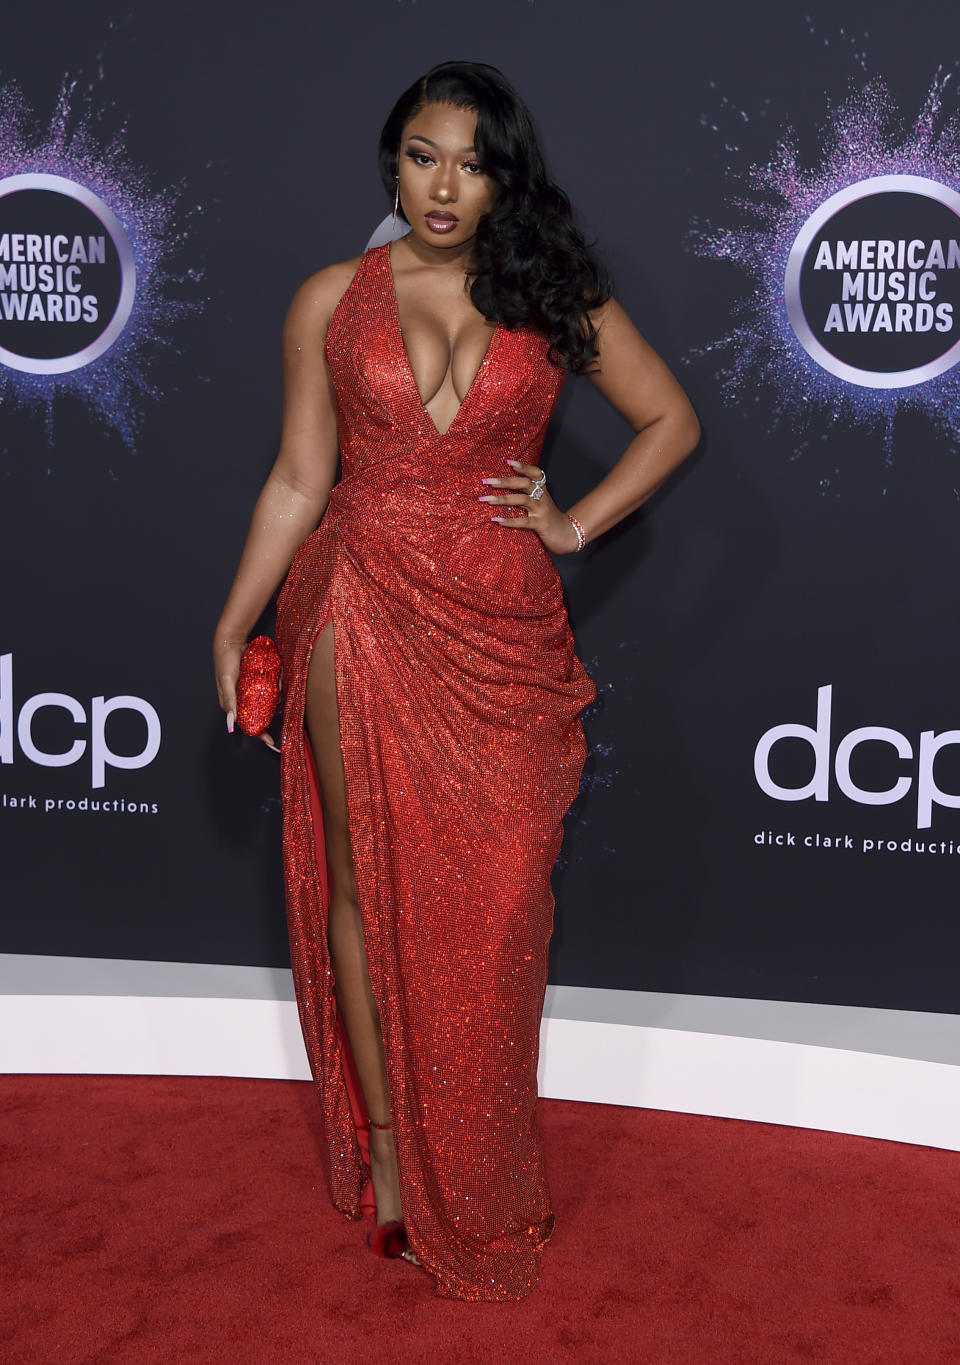 FILE - In this Nov. 24, 2019 file photo, Megan Thee Stallion arrives at the American Music Awards in Los Angeles. The rapper says she was shot multiple times, but expects to fully recover. The 25-year-old said in an Instagram post Wednesday that she had gunshot wounds from a crime committed against her Sunday with the intent to harm her and feels lucky to be alive. She did not say who shot her or why, and Los Angeles police had no immediate comment. (Photo by Jordan Strauss/Invision/AP, File)